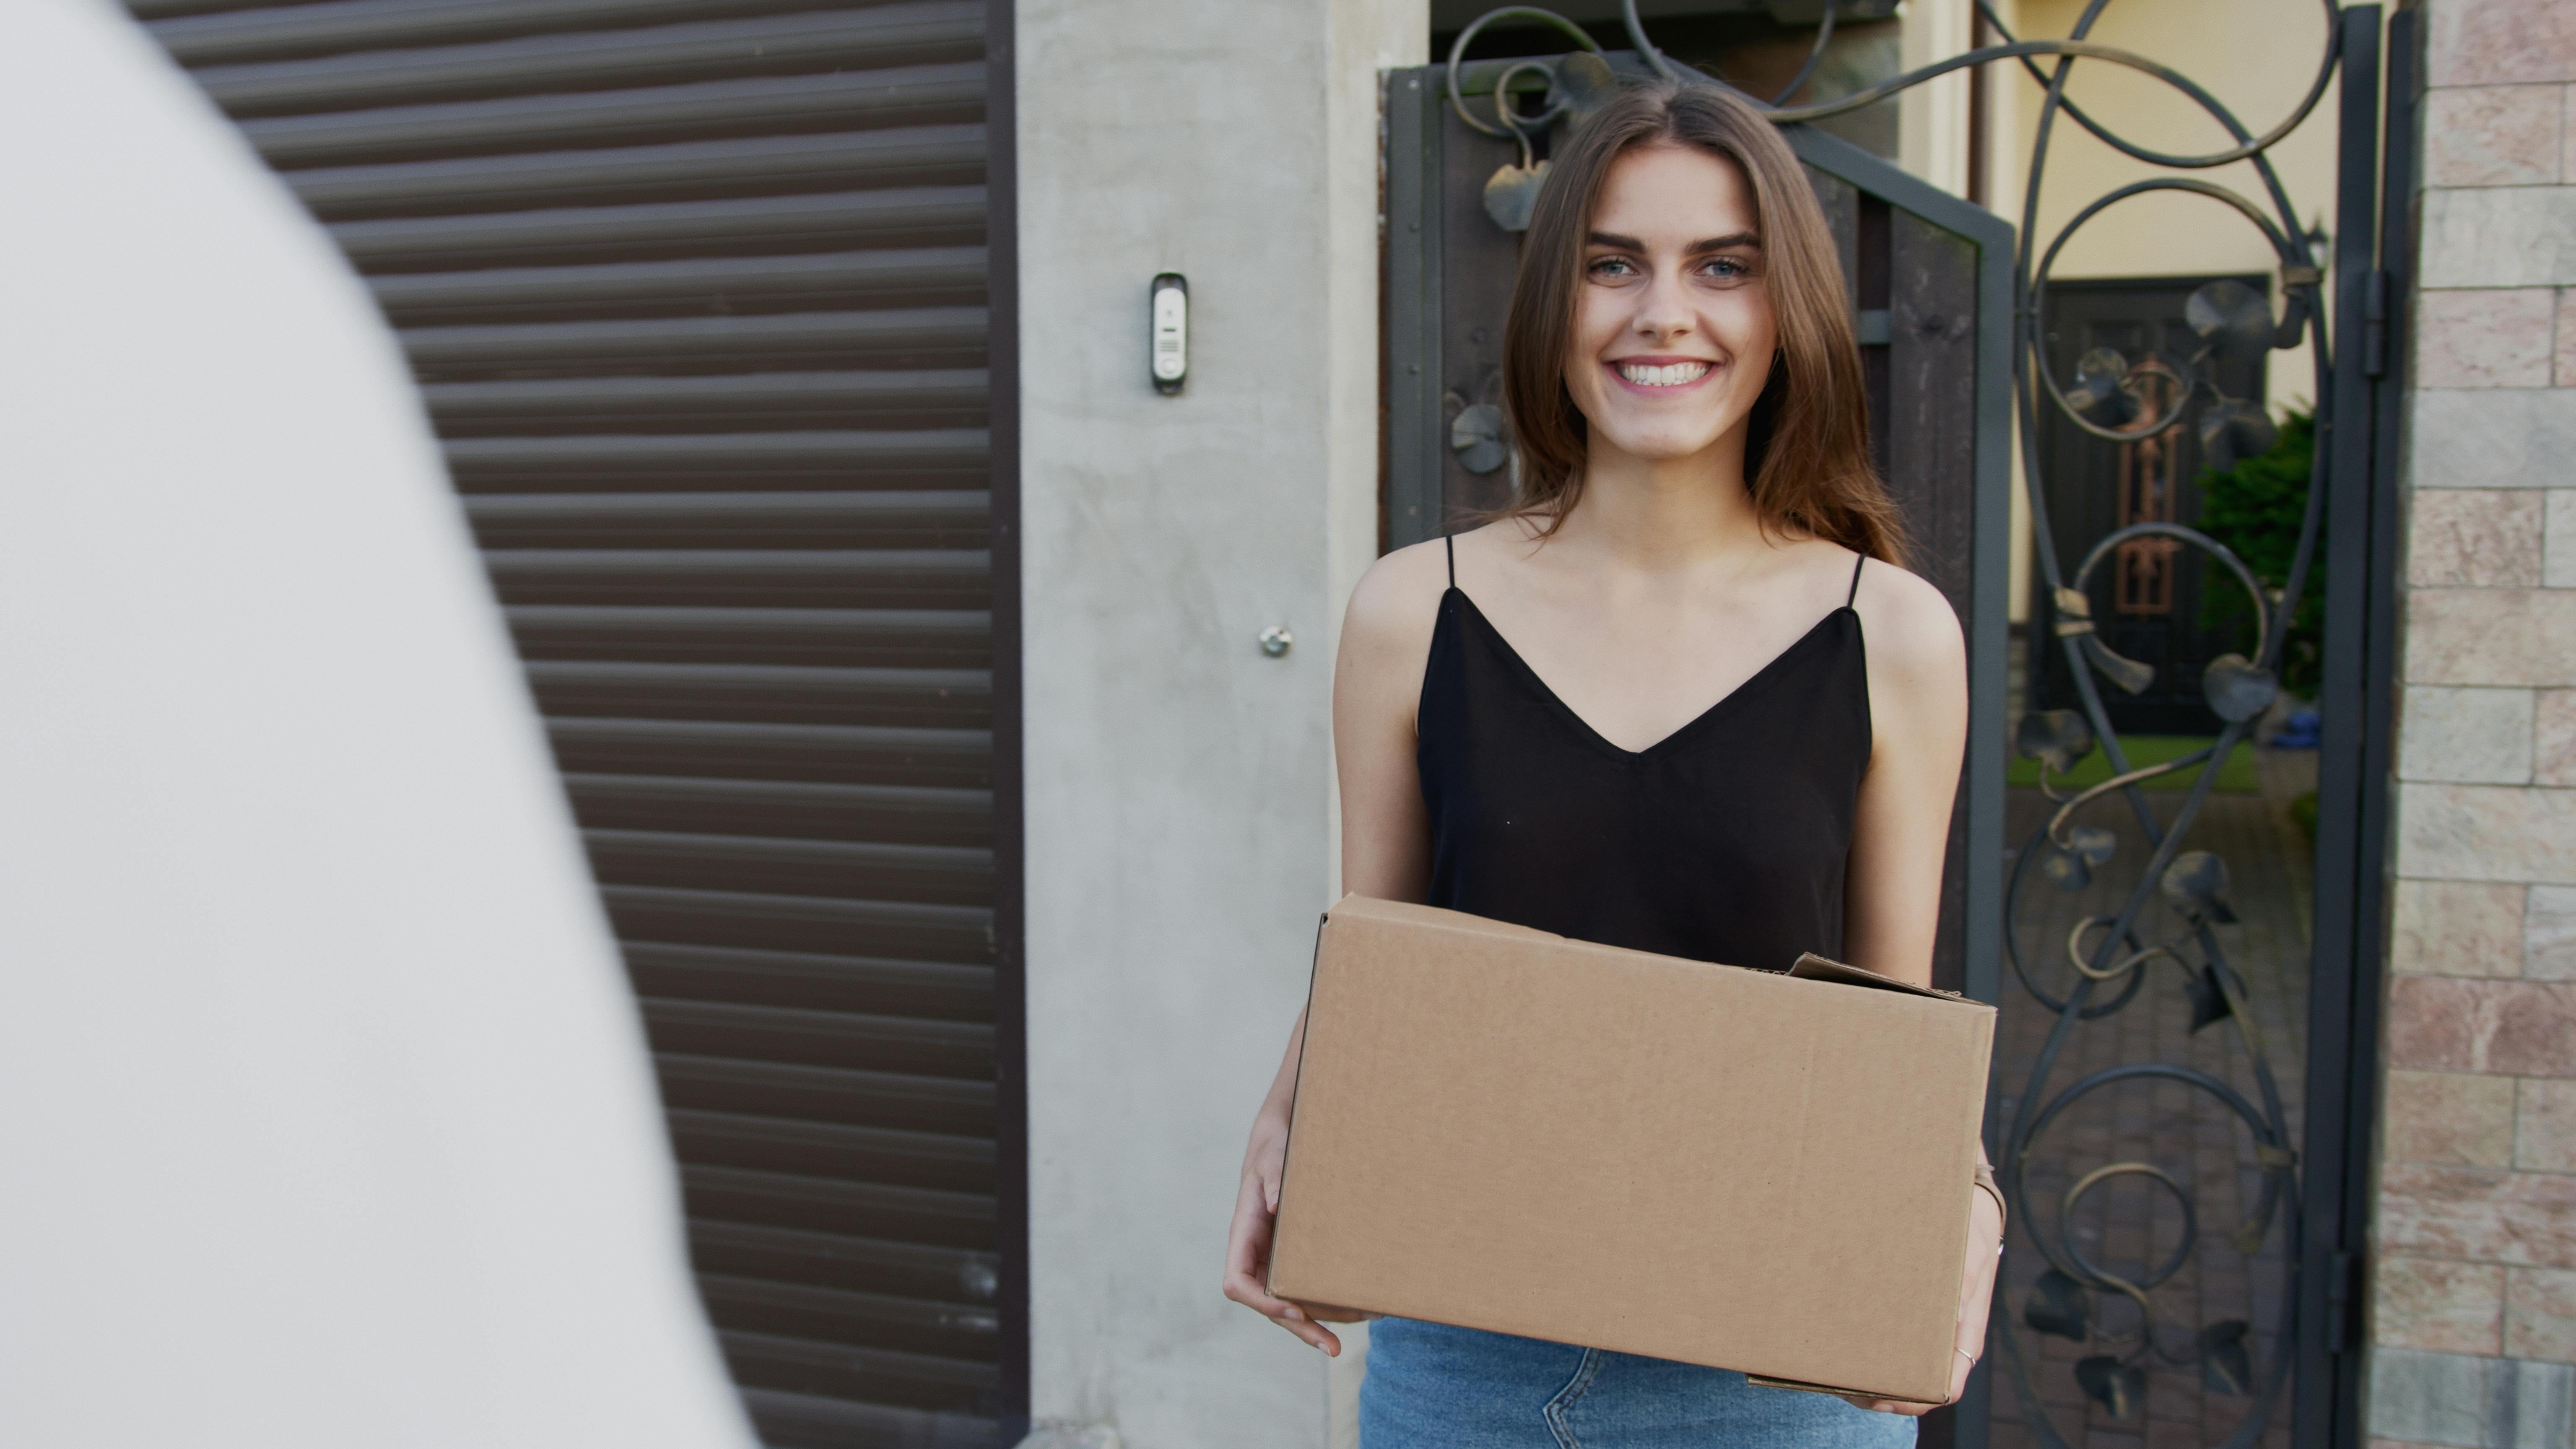 A happy woman holding a box | Source: Pexels